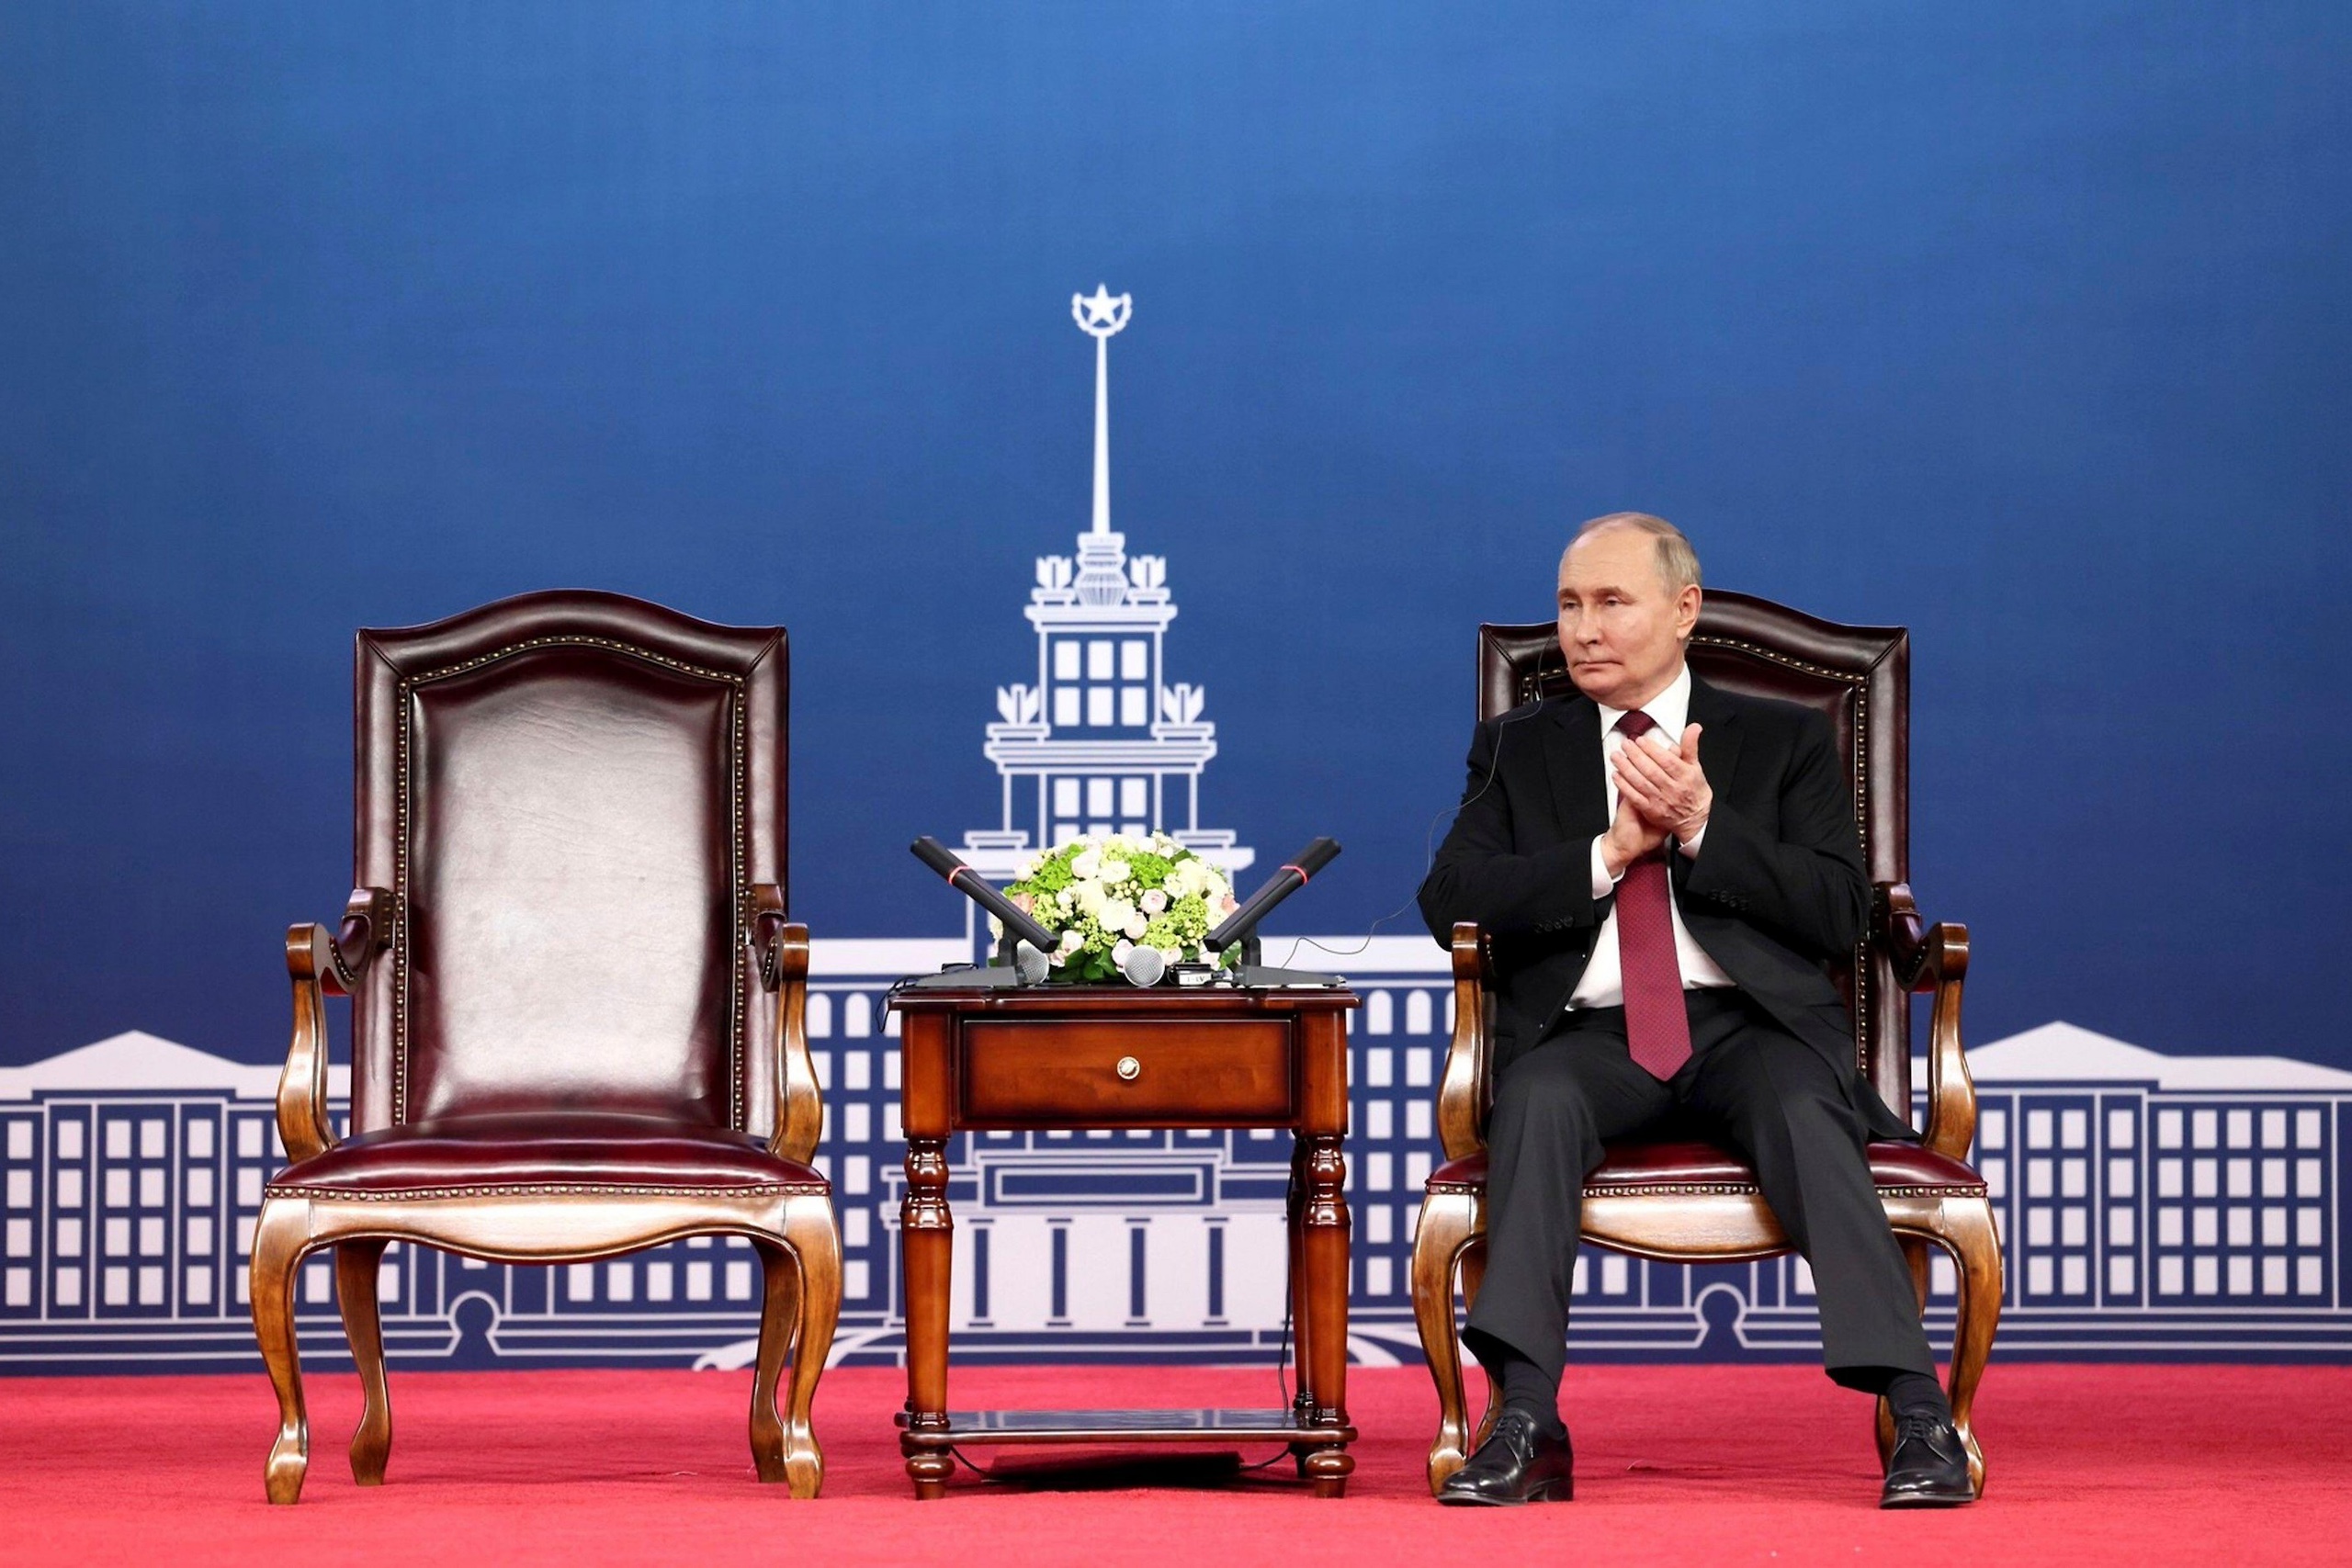 <p>Russian president Vladimir Putin in the northern city of Harbin during his recent visit to China (Image: Russian Presidential Press Service / Alamy)</p>